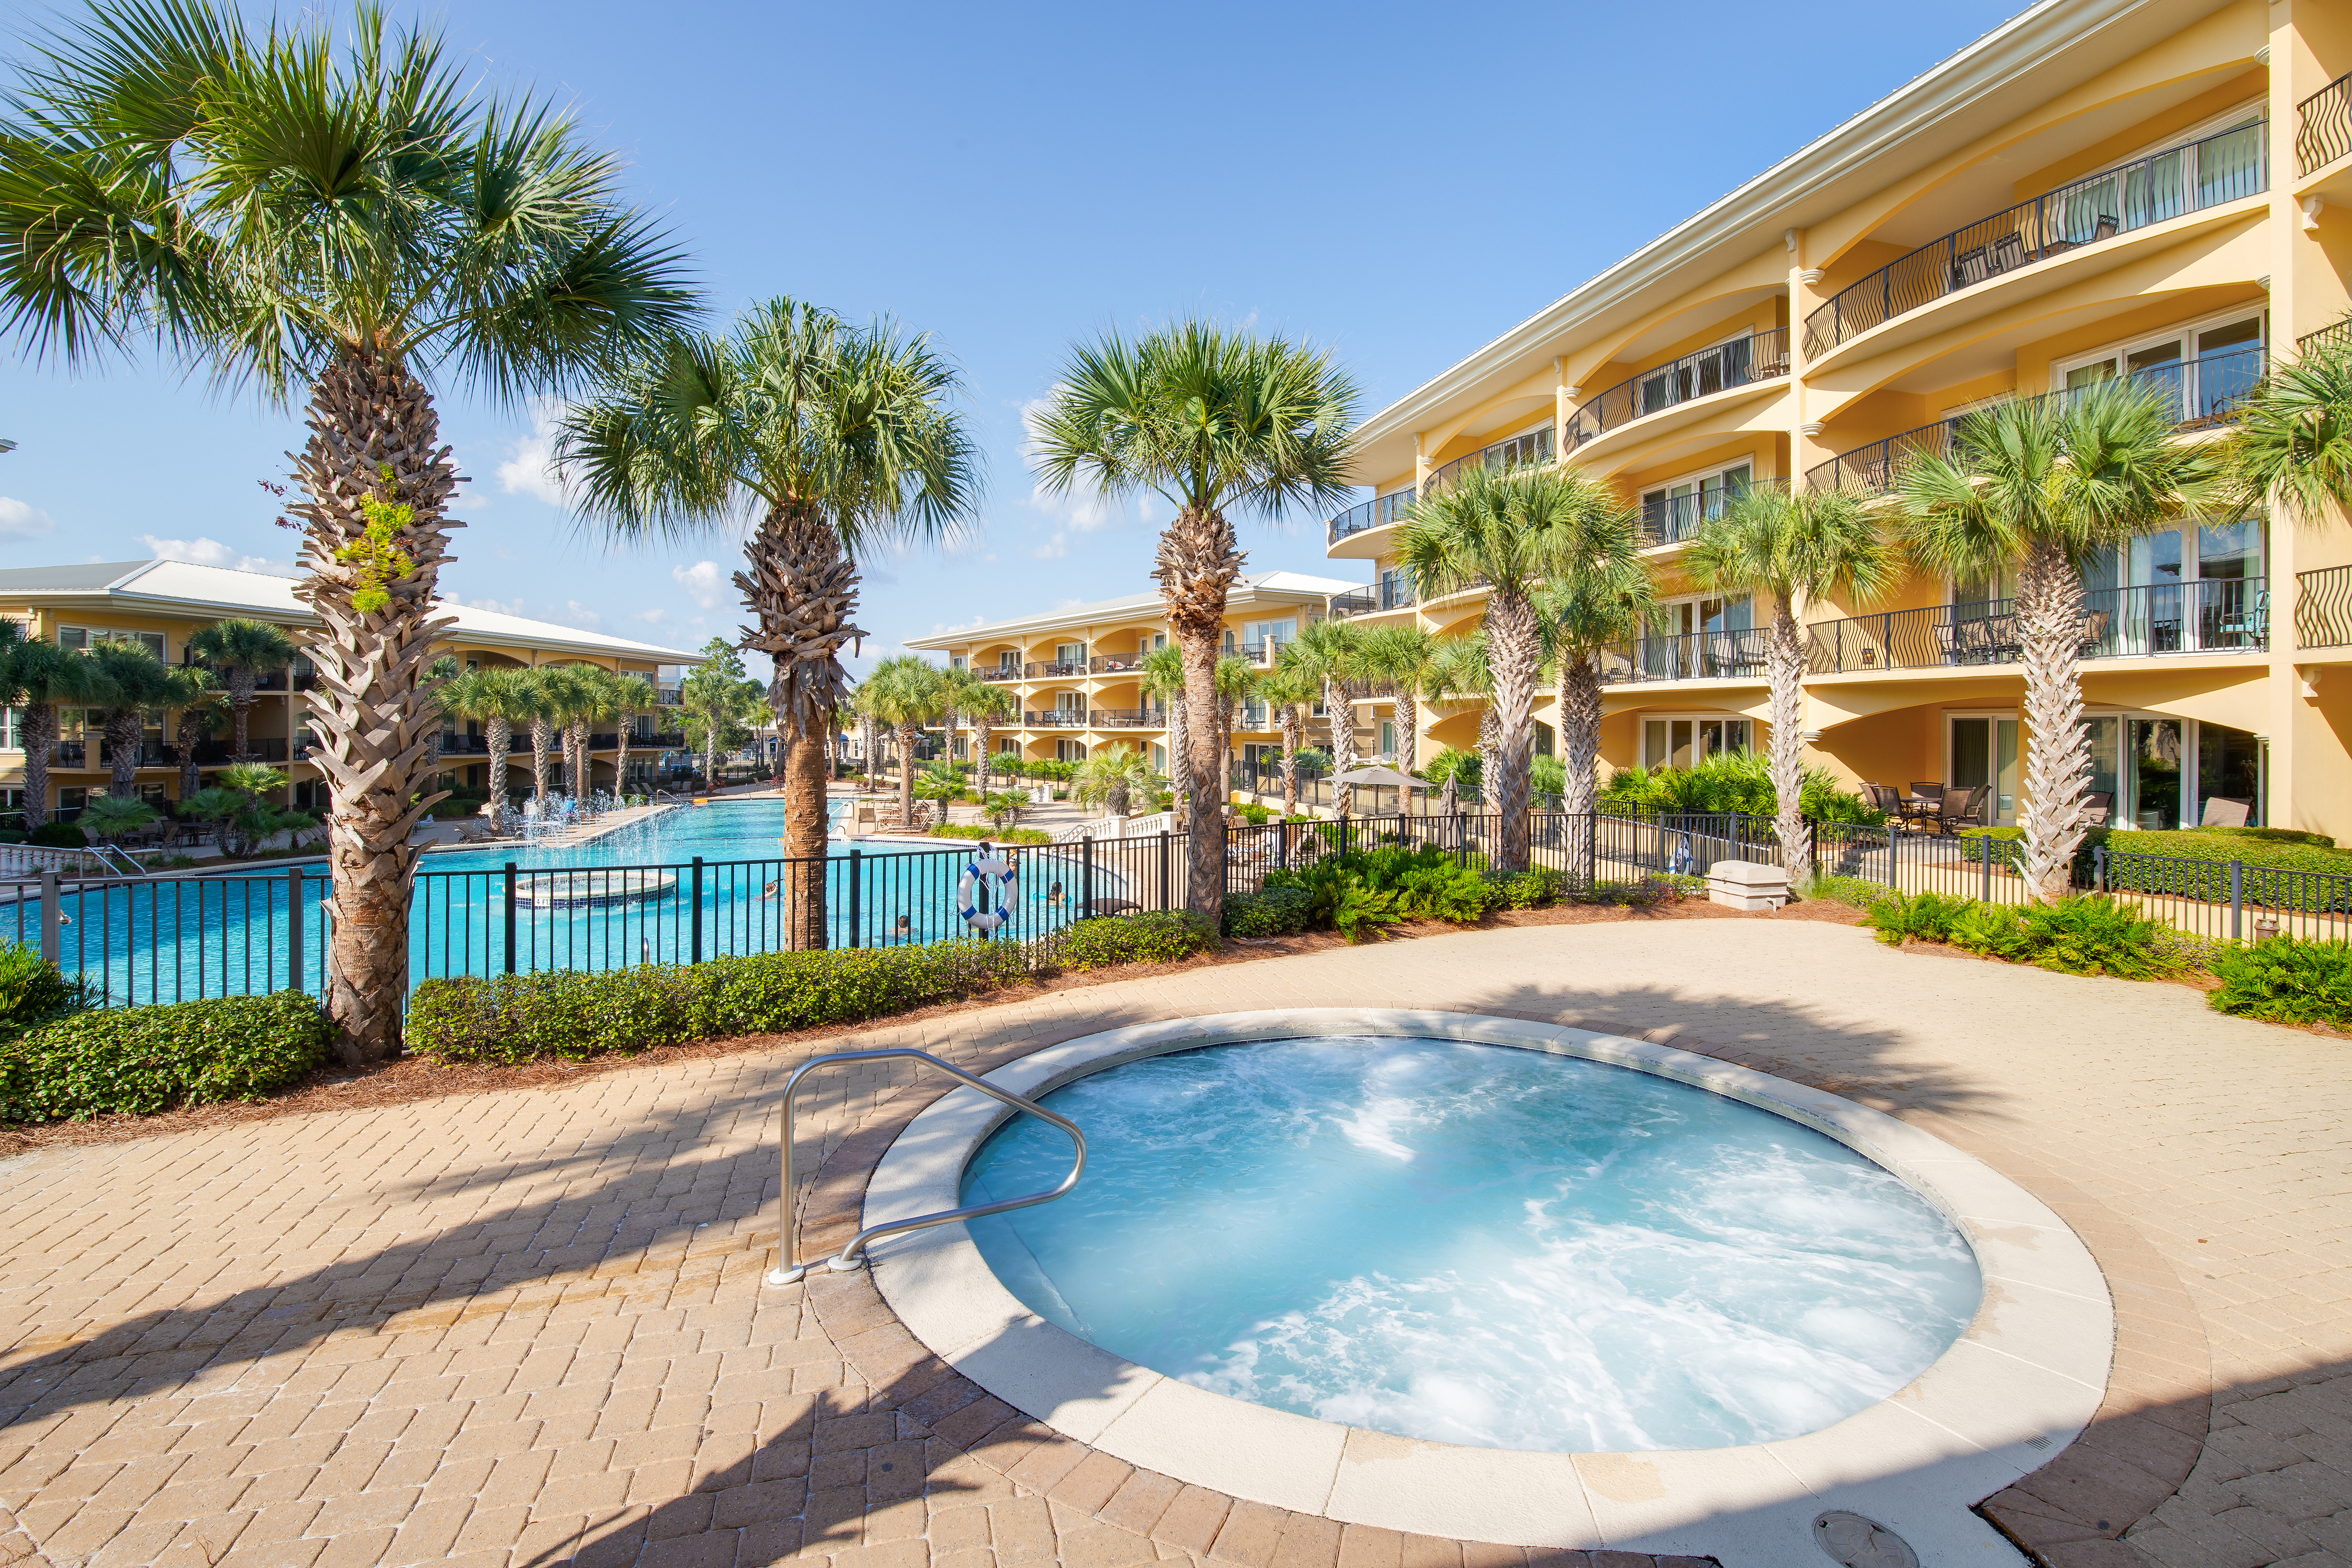 A shot of the outdoor pool and hot tub ensconced by palm trees at one of 30A's Gulf Front Condominiums